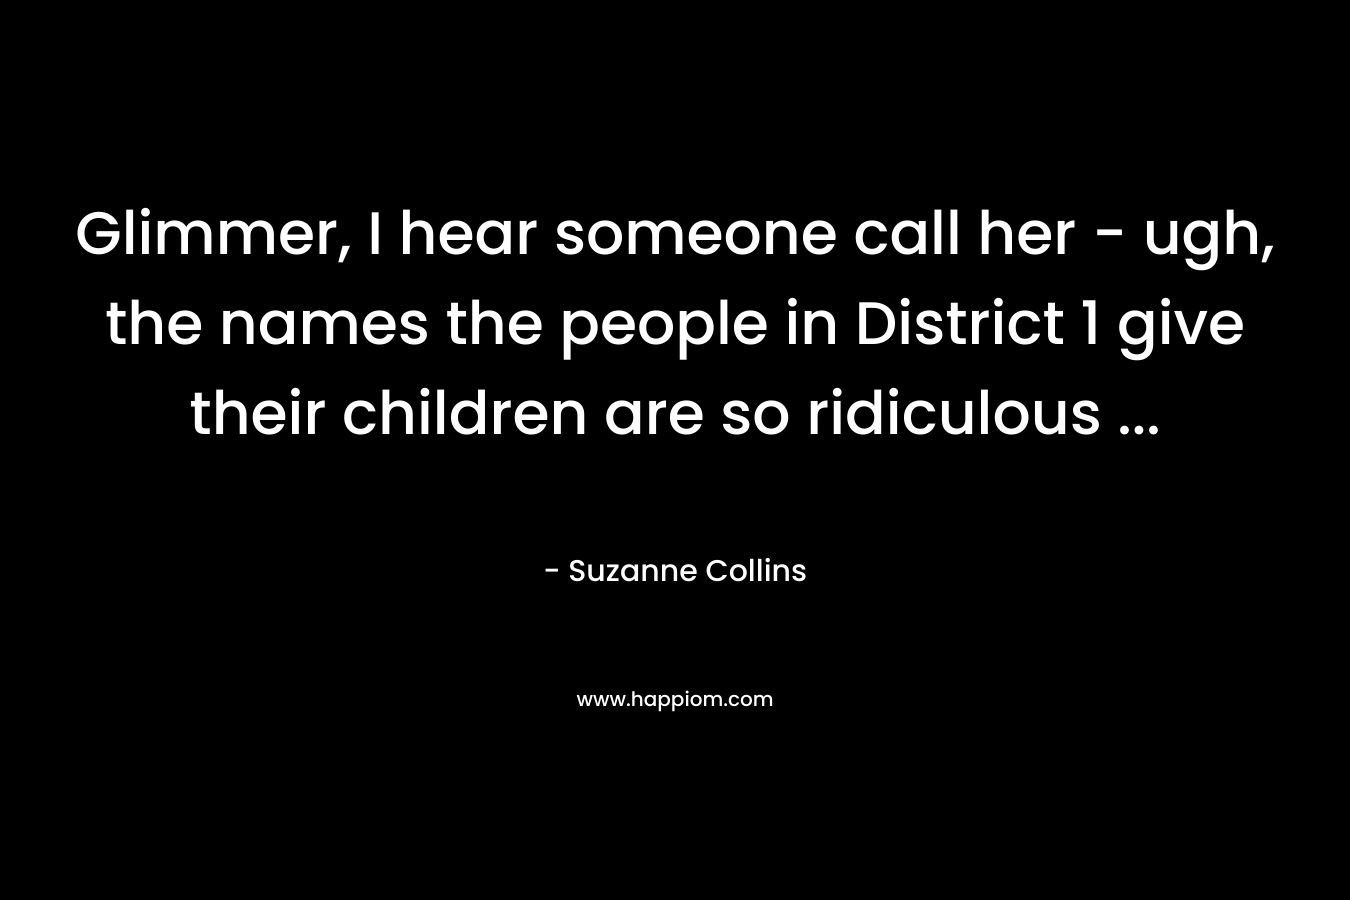 Glimmer, I hear someone call her - ugh, the names the people in District 1 give their children are so ridiculous ...